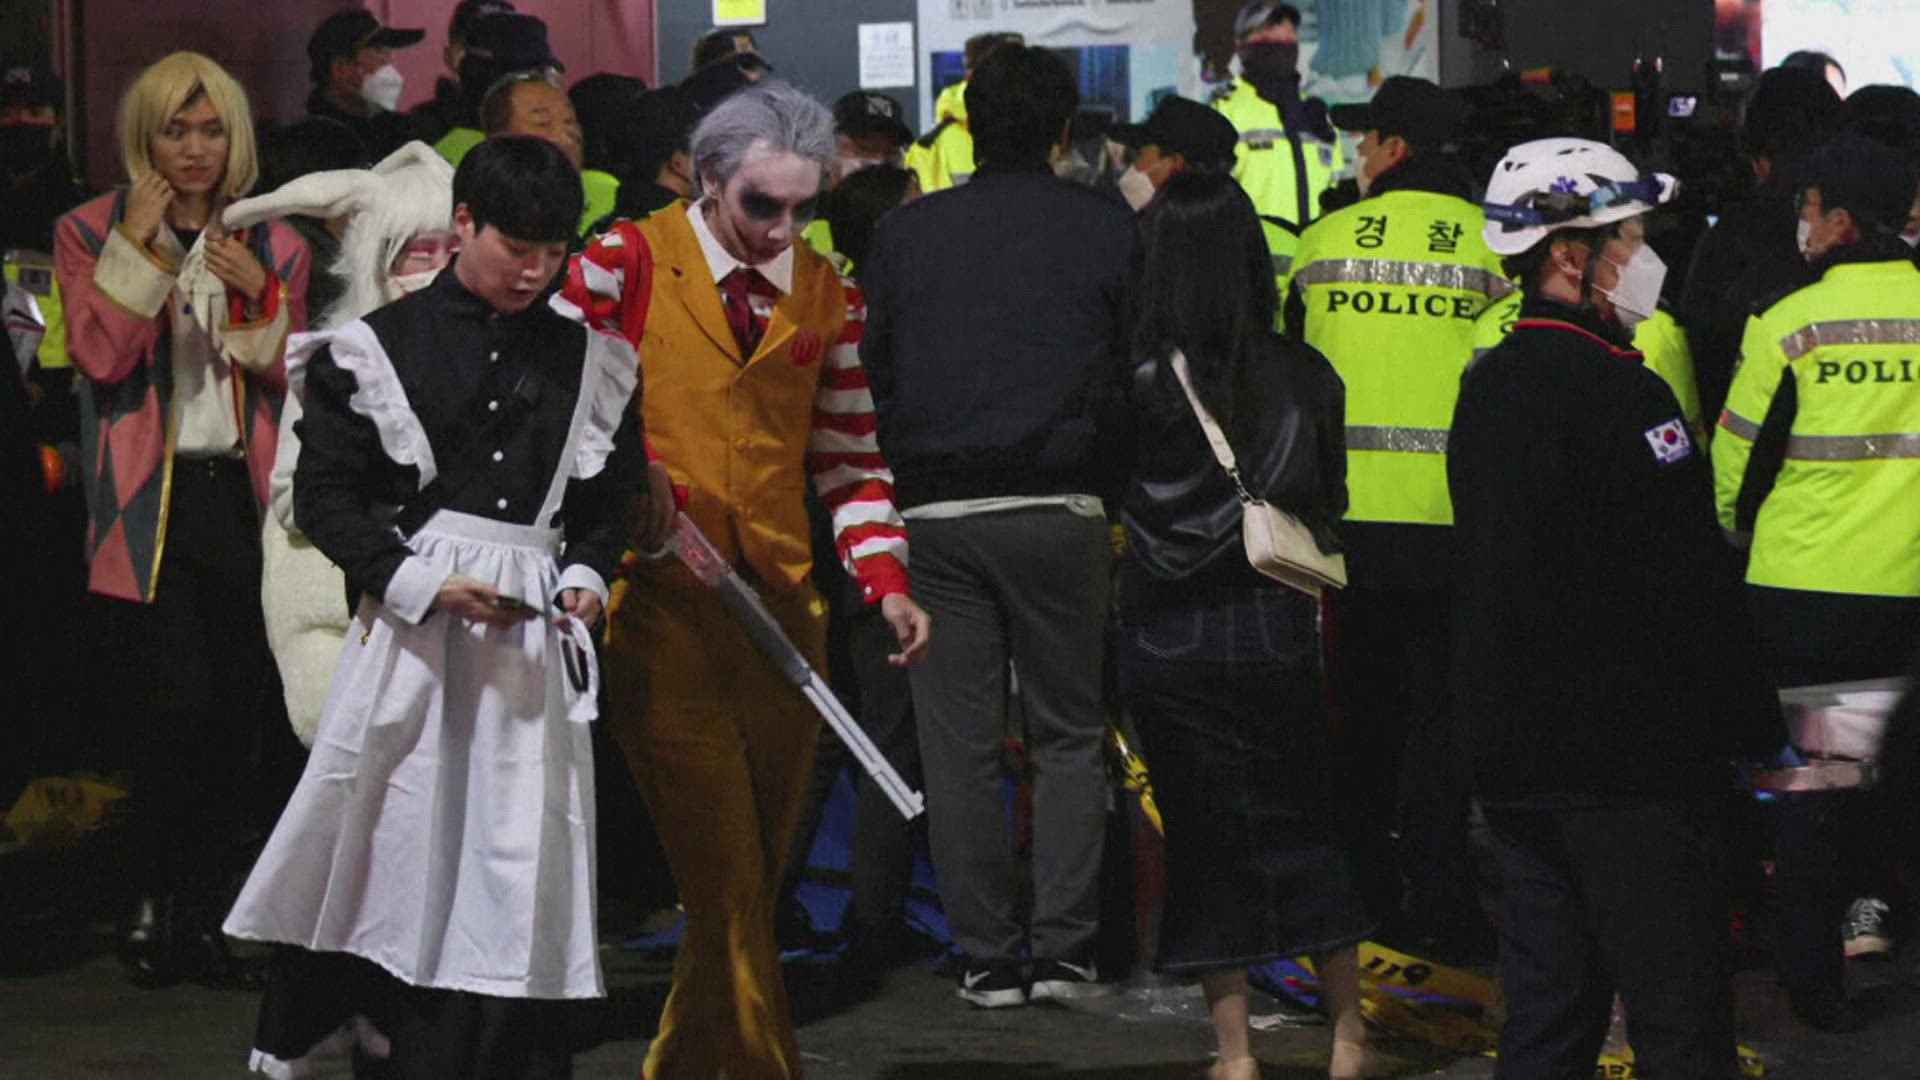 At least 153 were killed in a crowd surge at a Halloween event attended by hundreds of thousands in South Korea